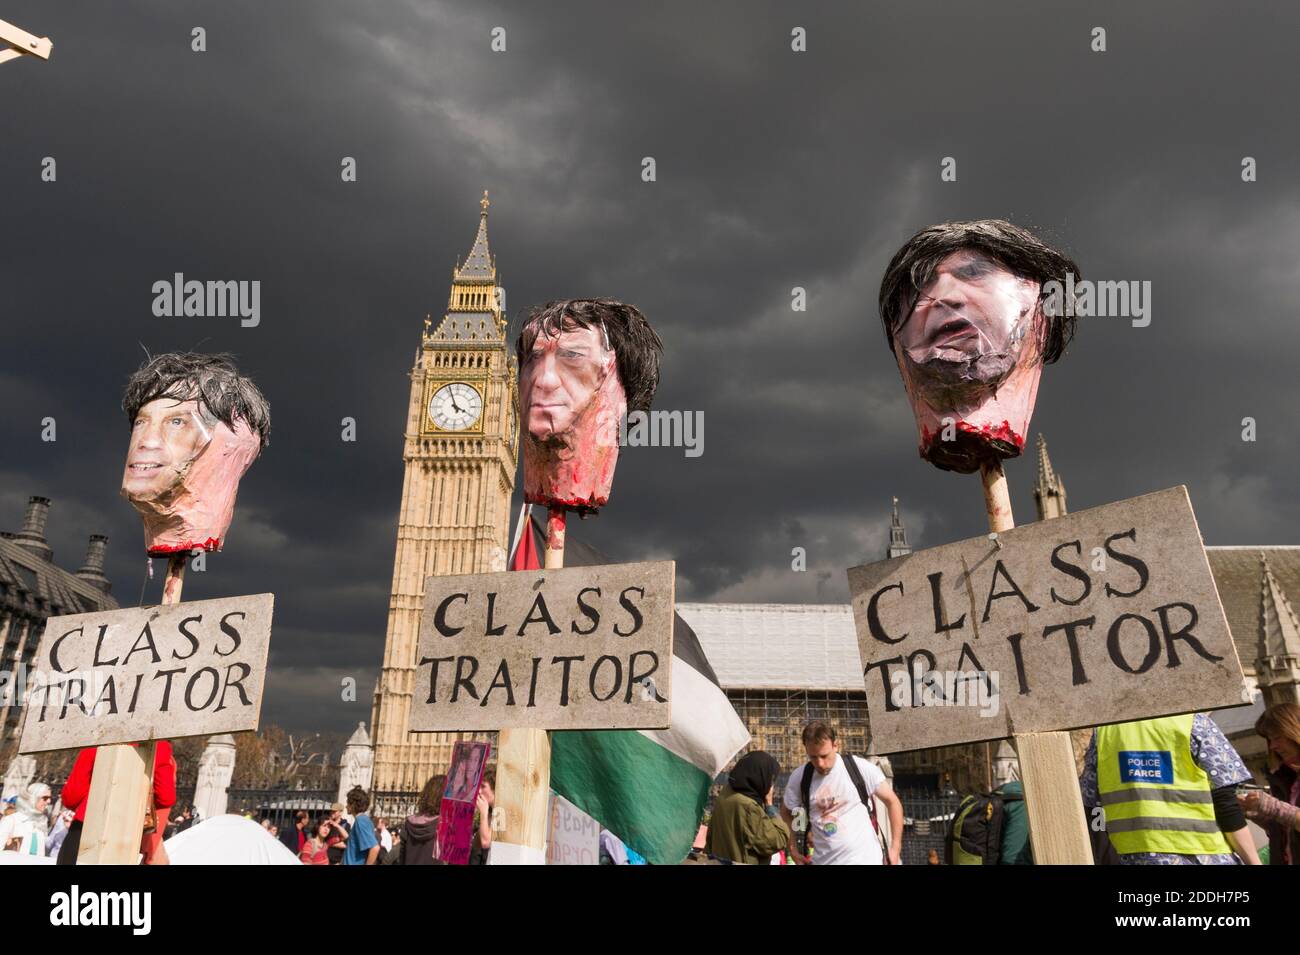 May Day demonstration Parliament Sq. The Demonstration was mainly focused on up coming general election which takes place on 6th May. Effigys of Tony Blair, Peter Mandelson and Gordon Brown's heads on stakes. Houses of Parliament, Parliament Square, London, UK.  1 May 2010 Stock Photo